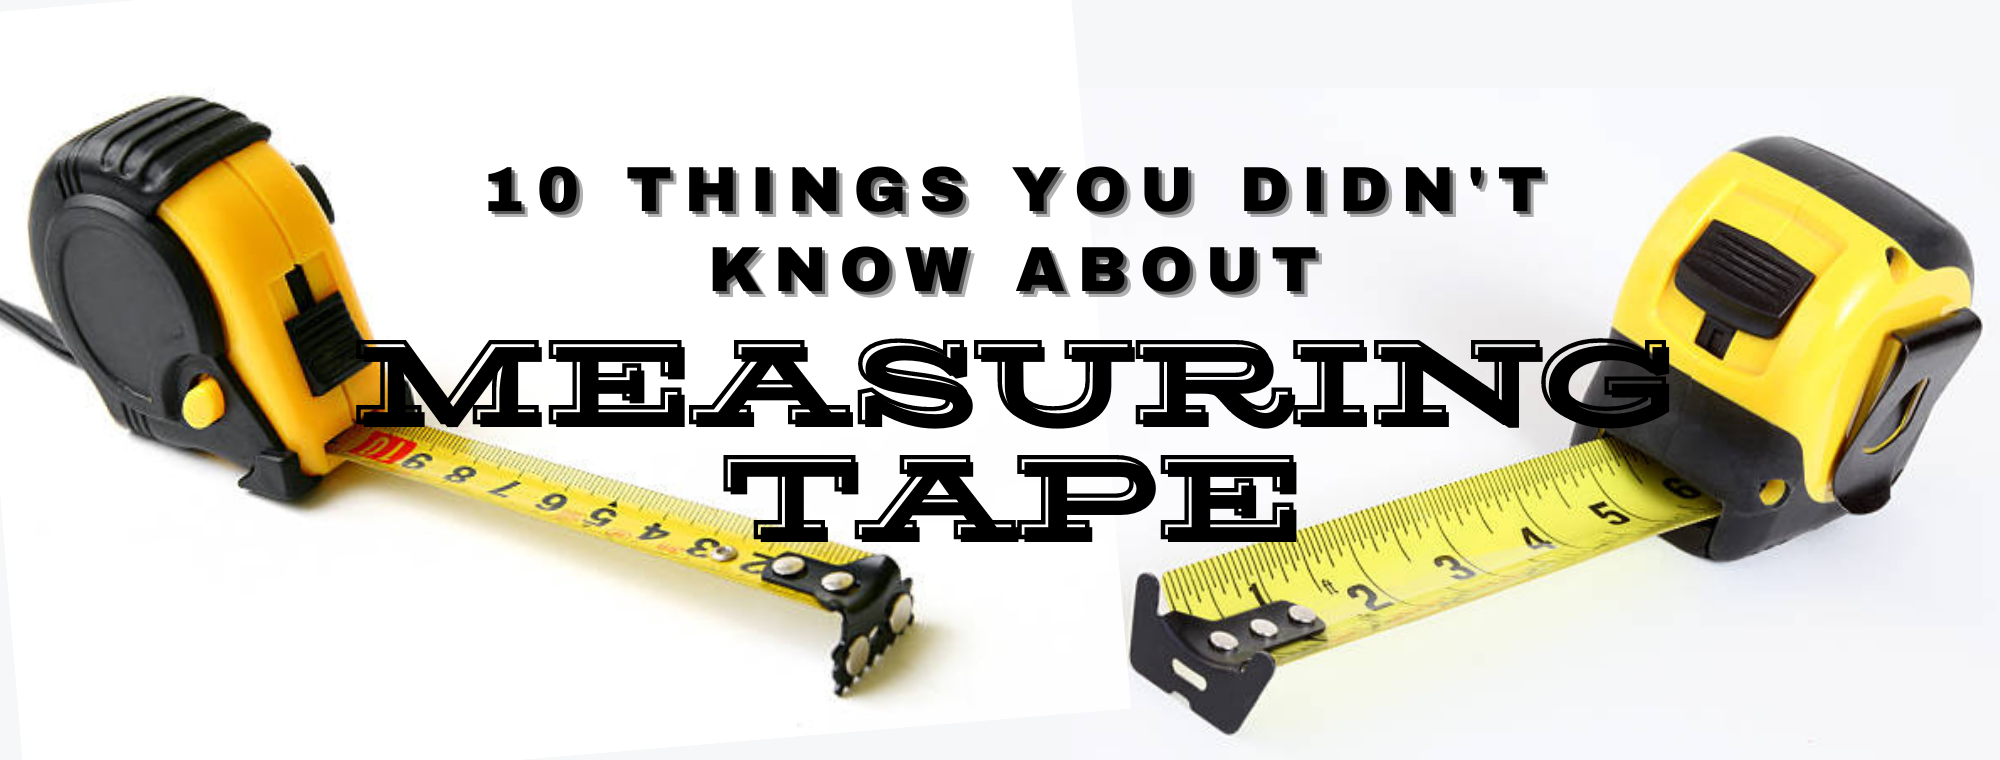 10 Things you didn’t know about your measuring tape